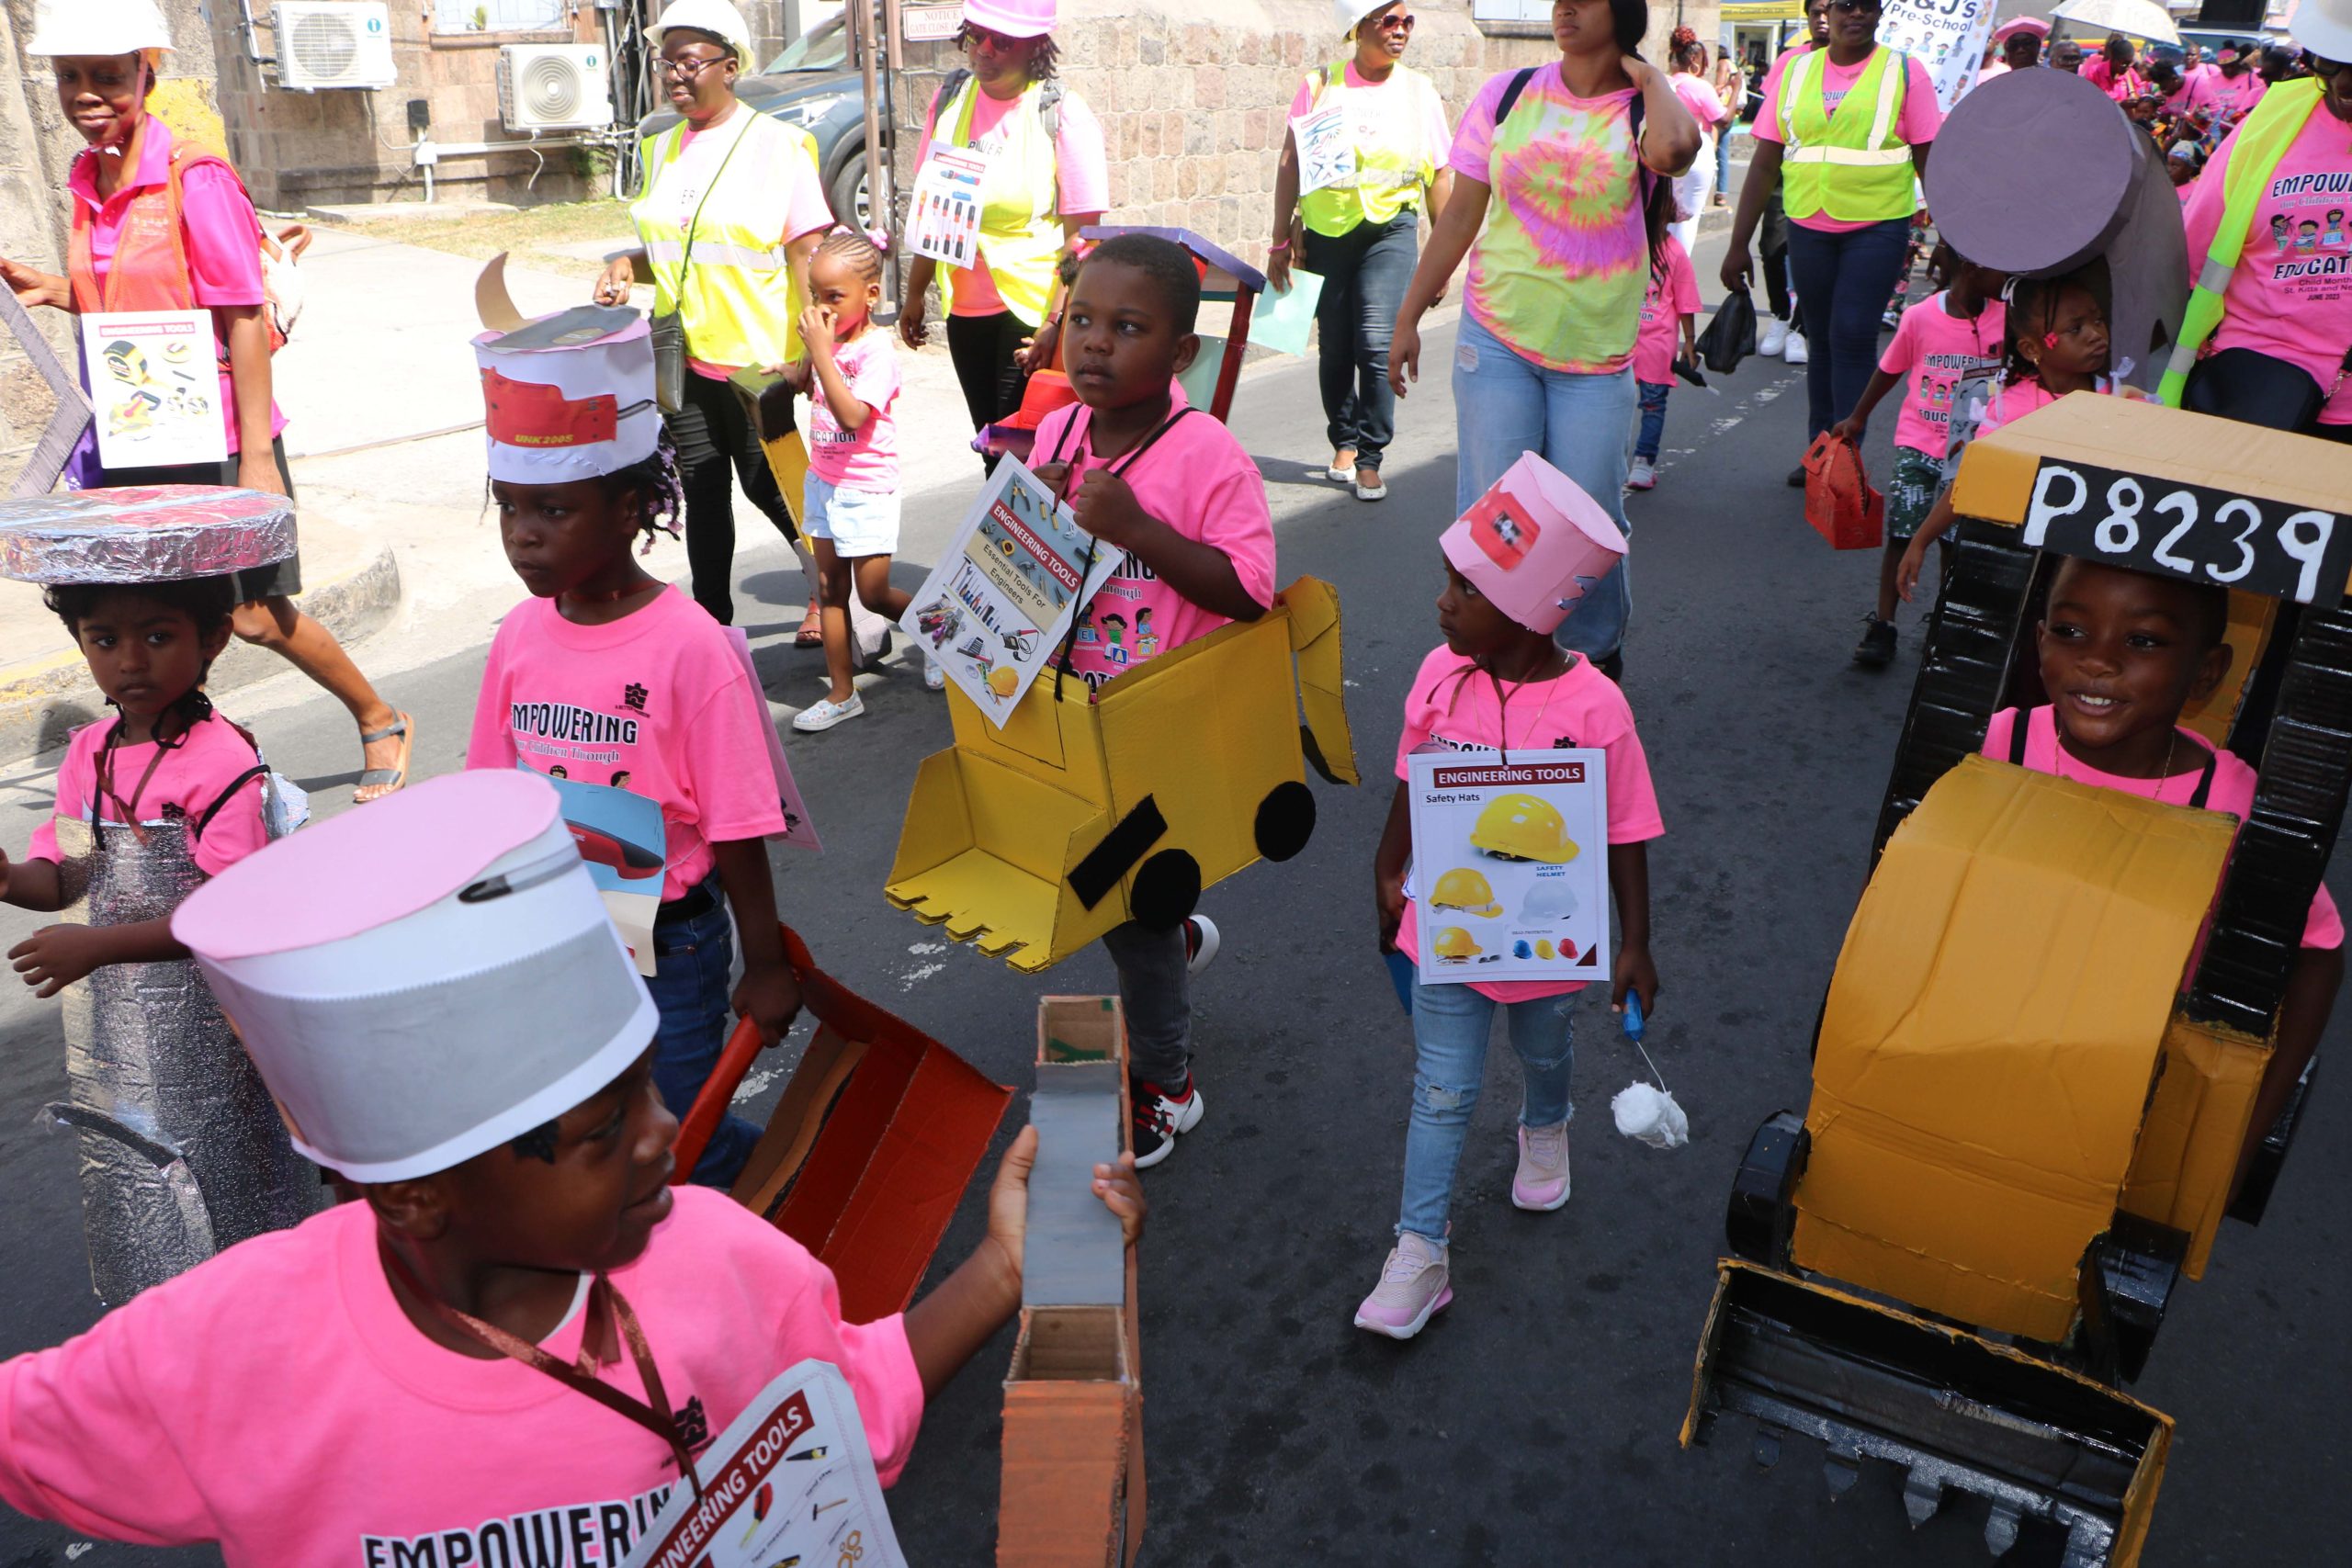 Hundreds of preschoolers on Nevis and parents walked through the streets of Charlestown from Old Hospital Road to the Elquemedo T. Willett Park, in the annual Early Childhood Education’s Child Month Parade on June 09, 2023, with the theme “Empowering our children through STEAM (Science Technology Engineering Arts and Mathematics) Education.”